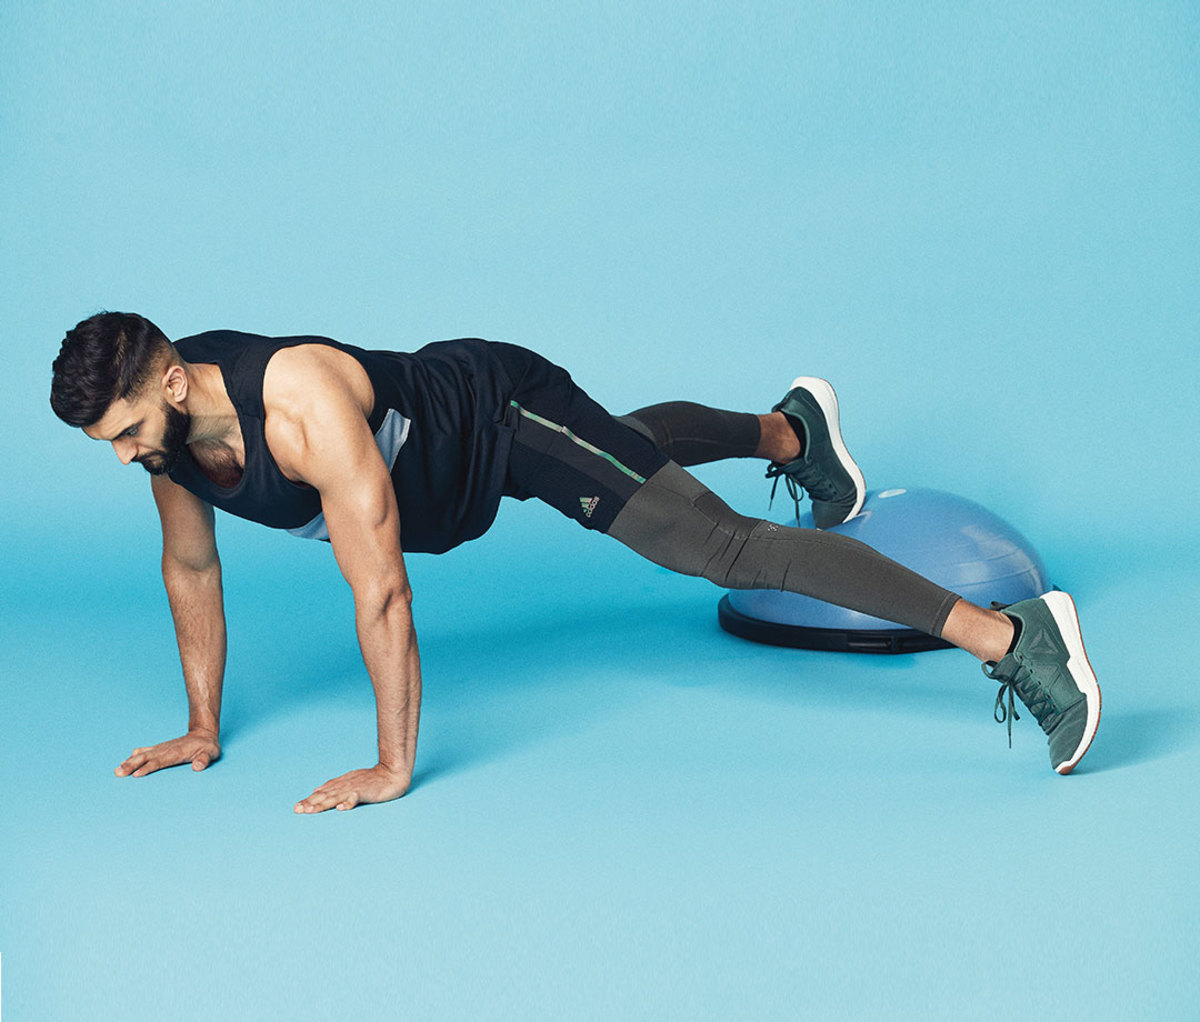 50 Best Abs Exercises That Pack a Six-Pack Punch - Men's Journal